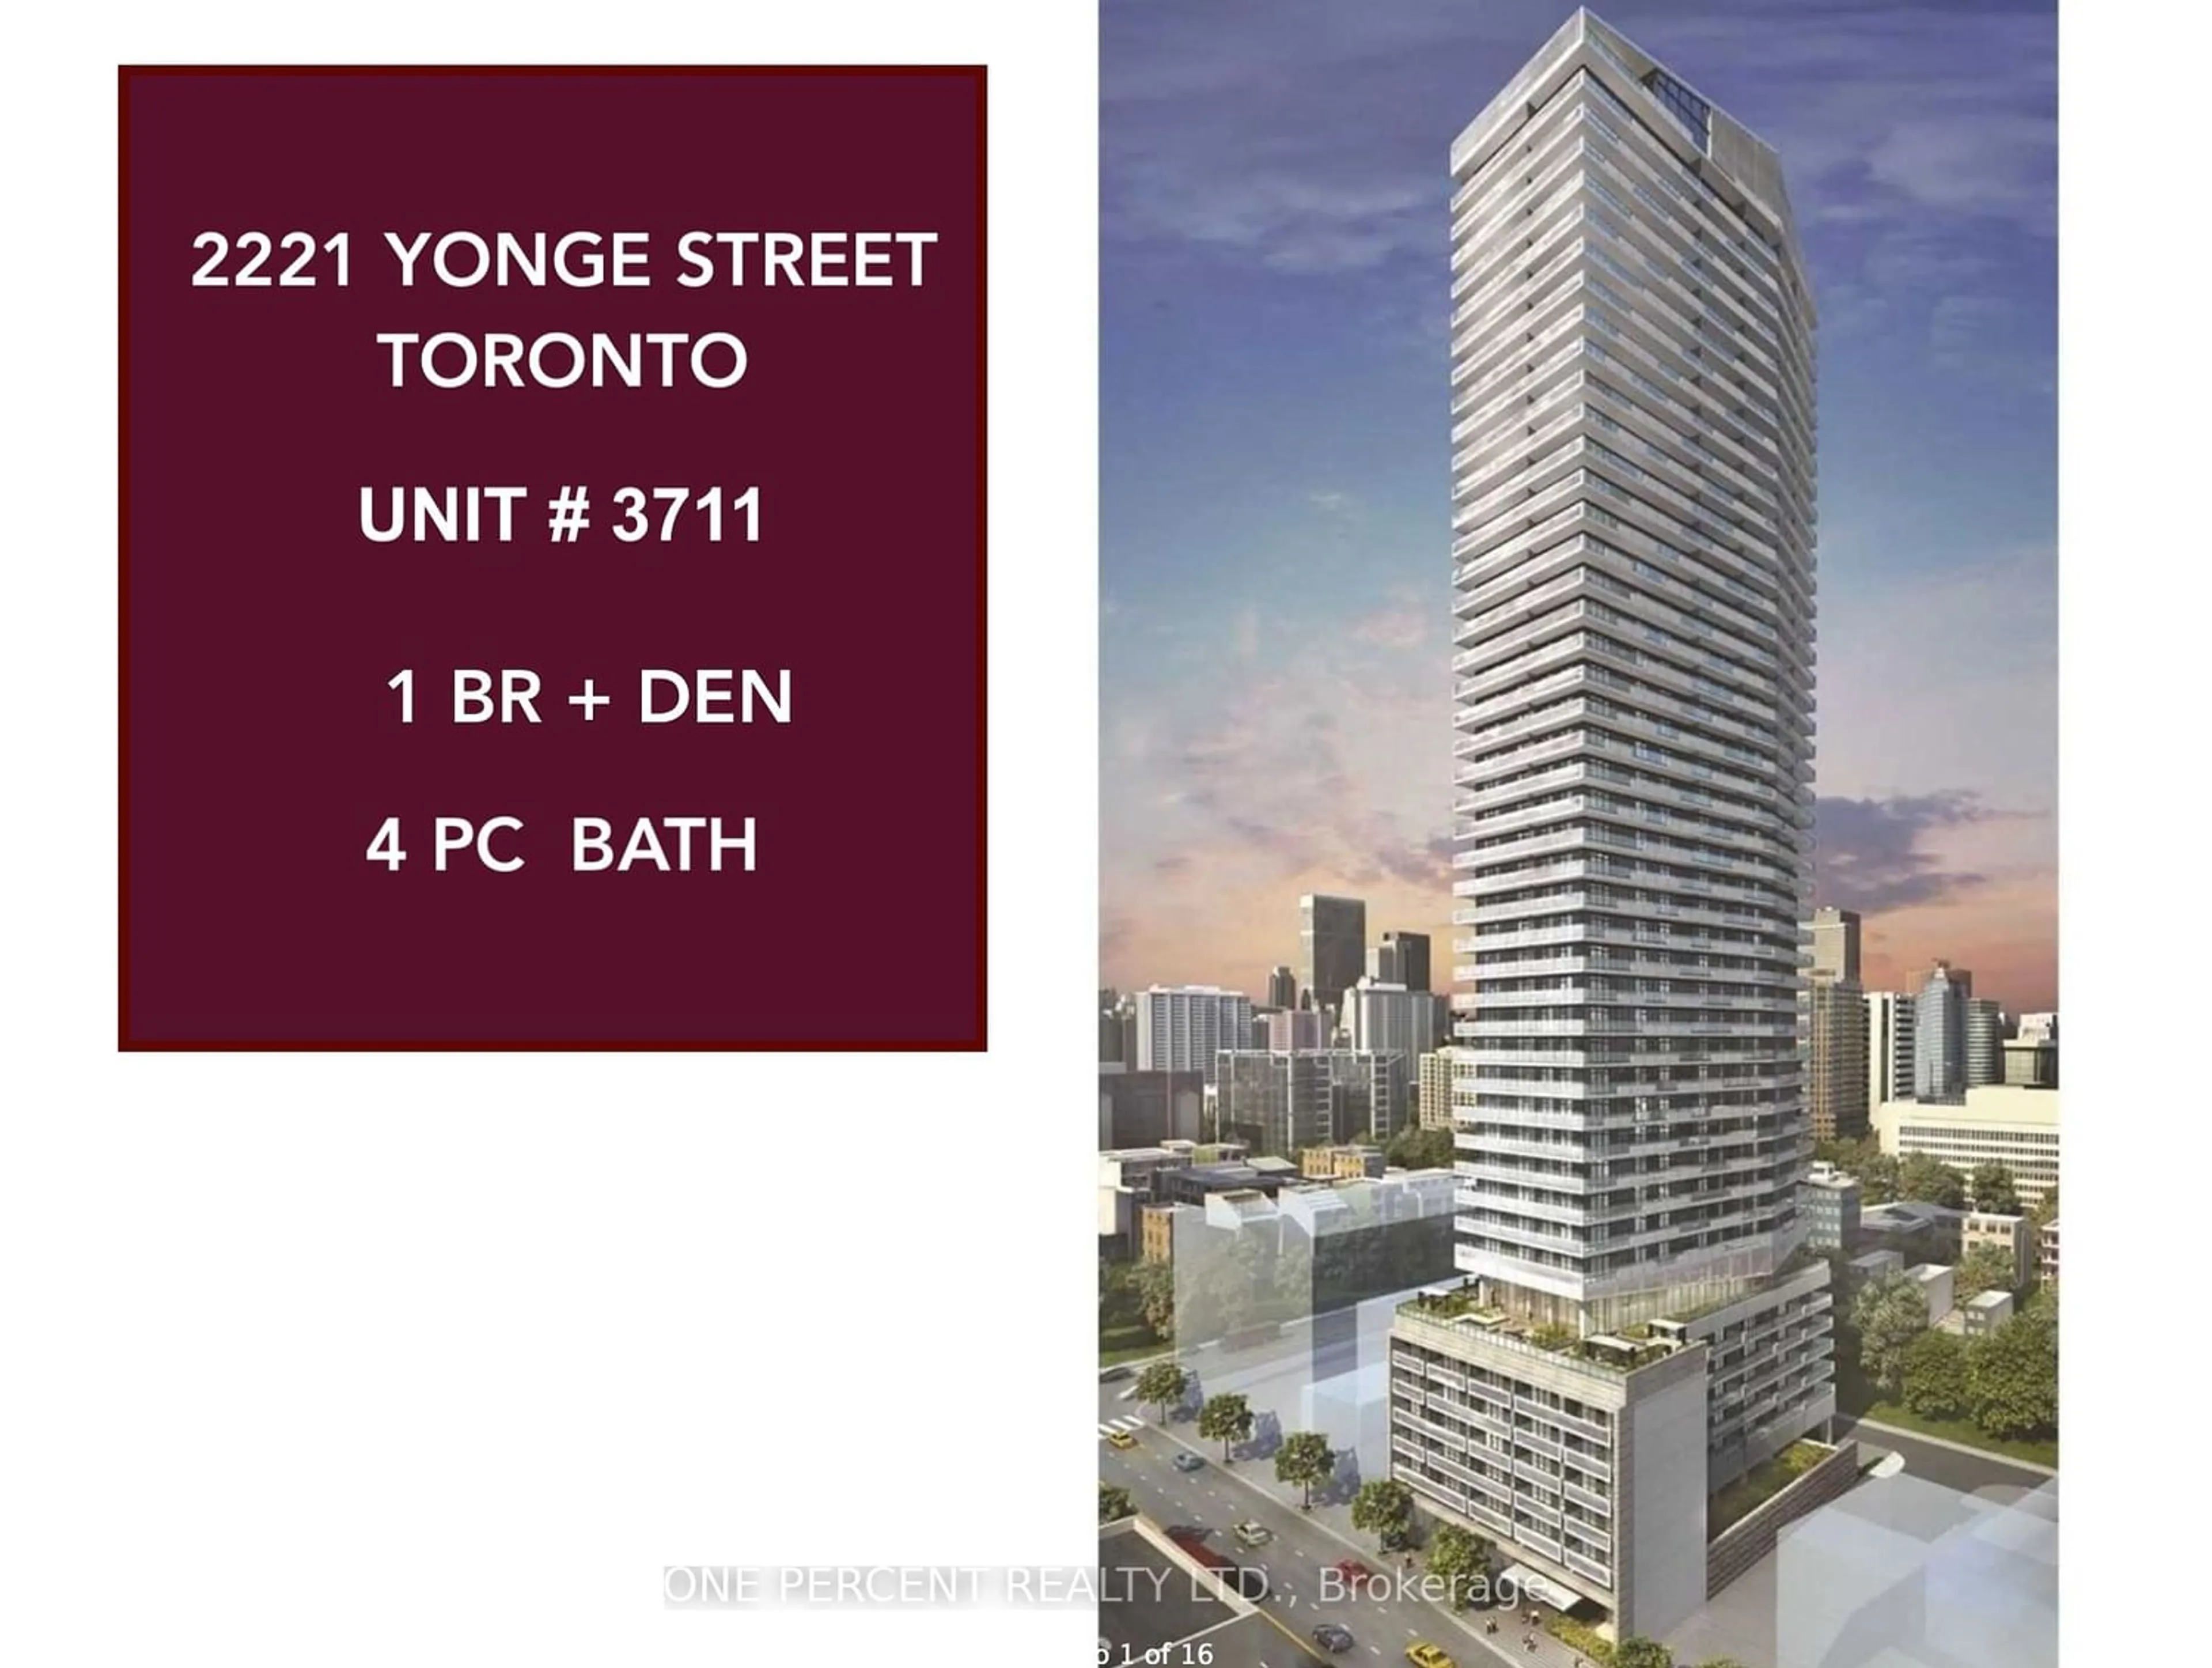 A pic from exterior of the house or condo for 2221 Yonge St #3711, Toronto Ontario M4S 0B8